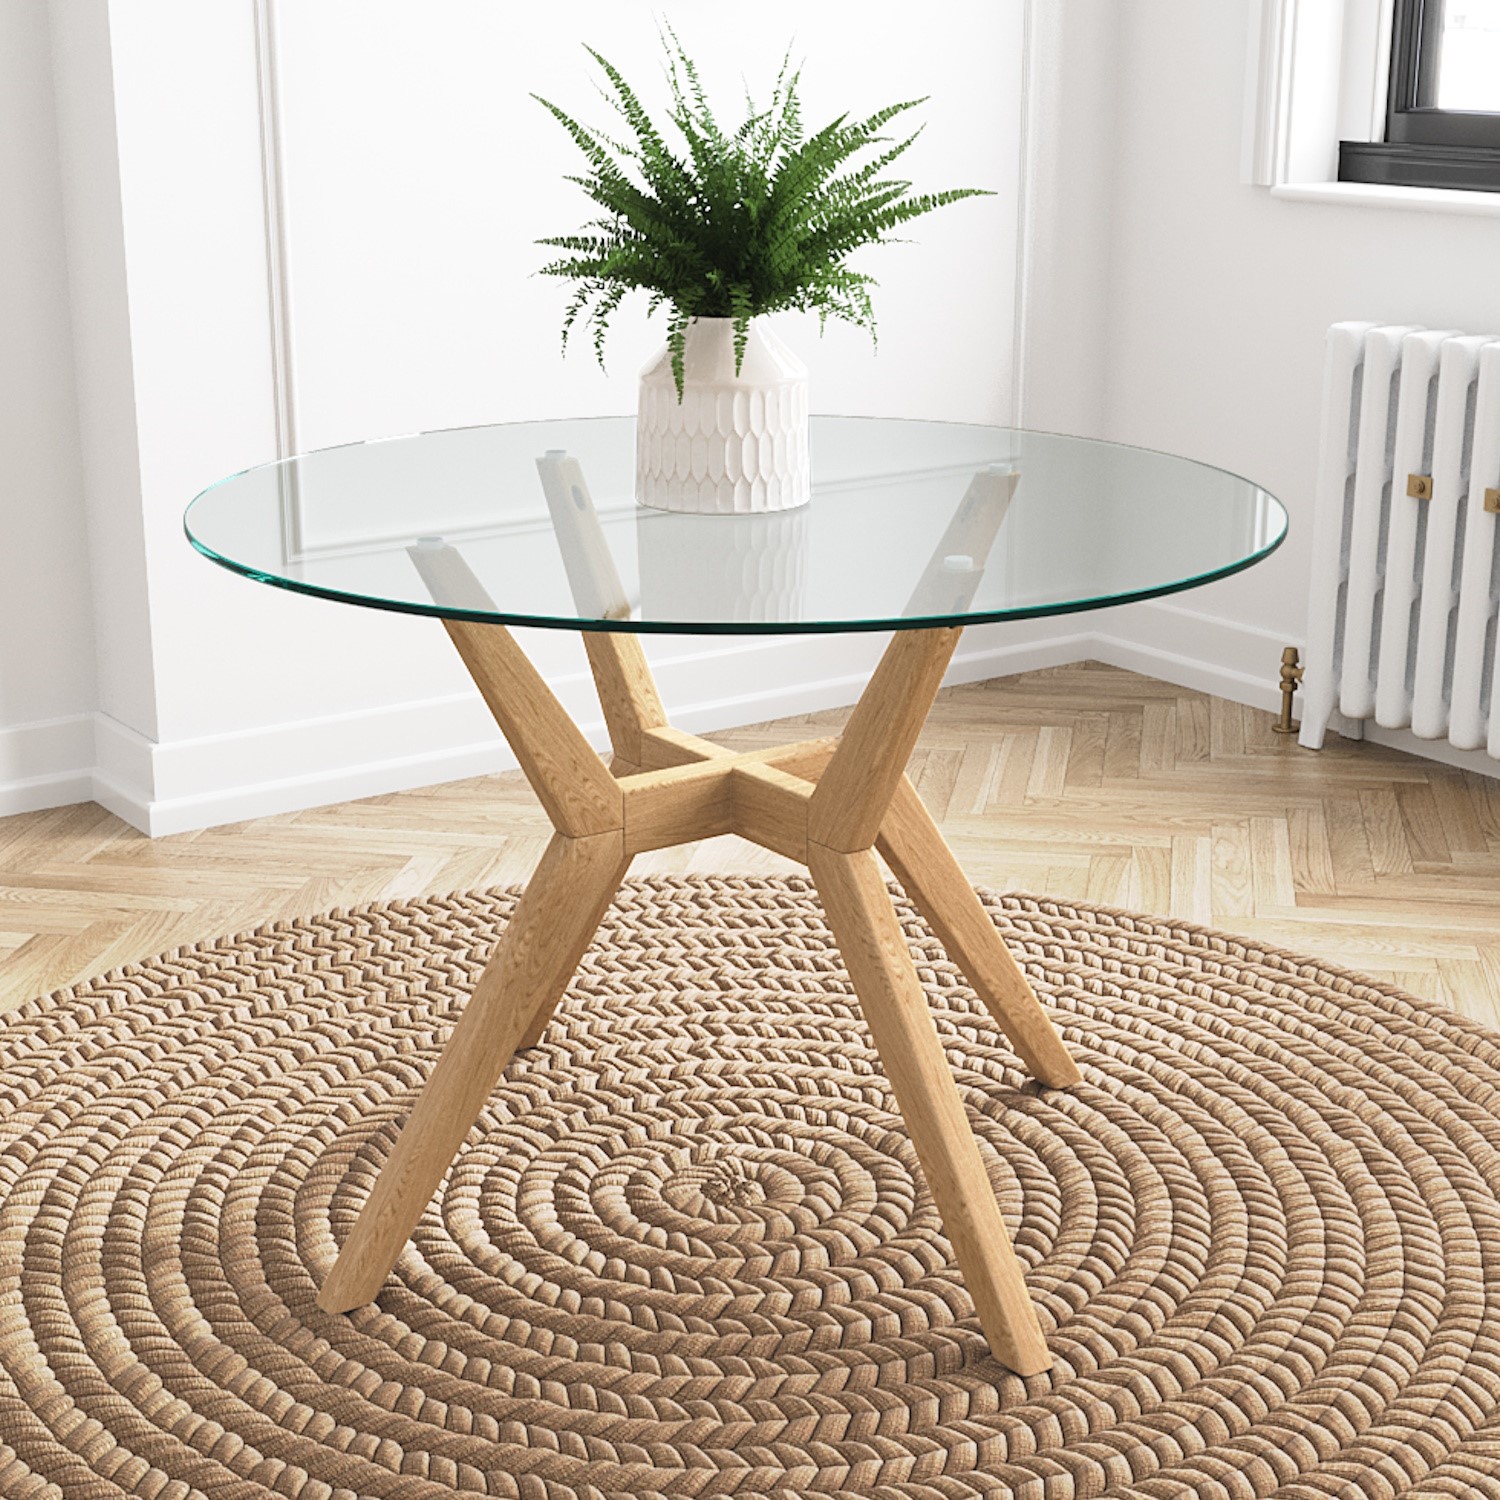 Photo of Large round glass top dining table with oak legs - seats 4 - nori